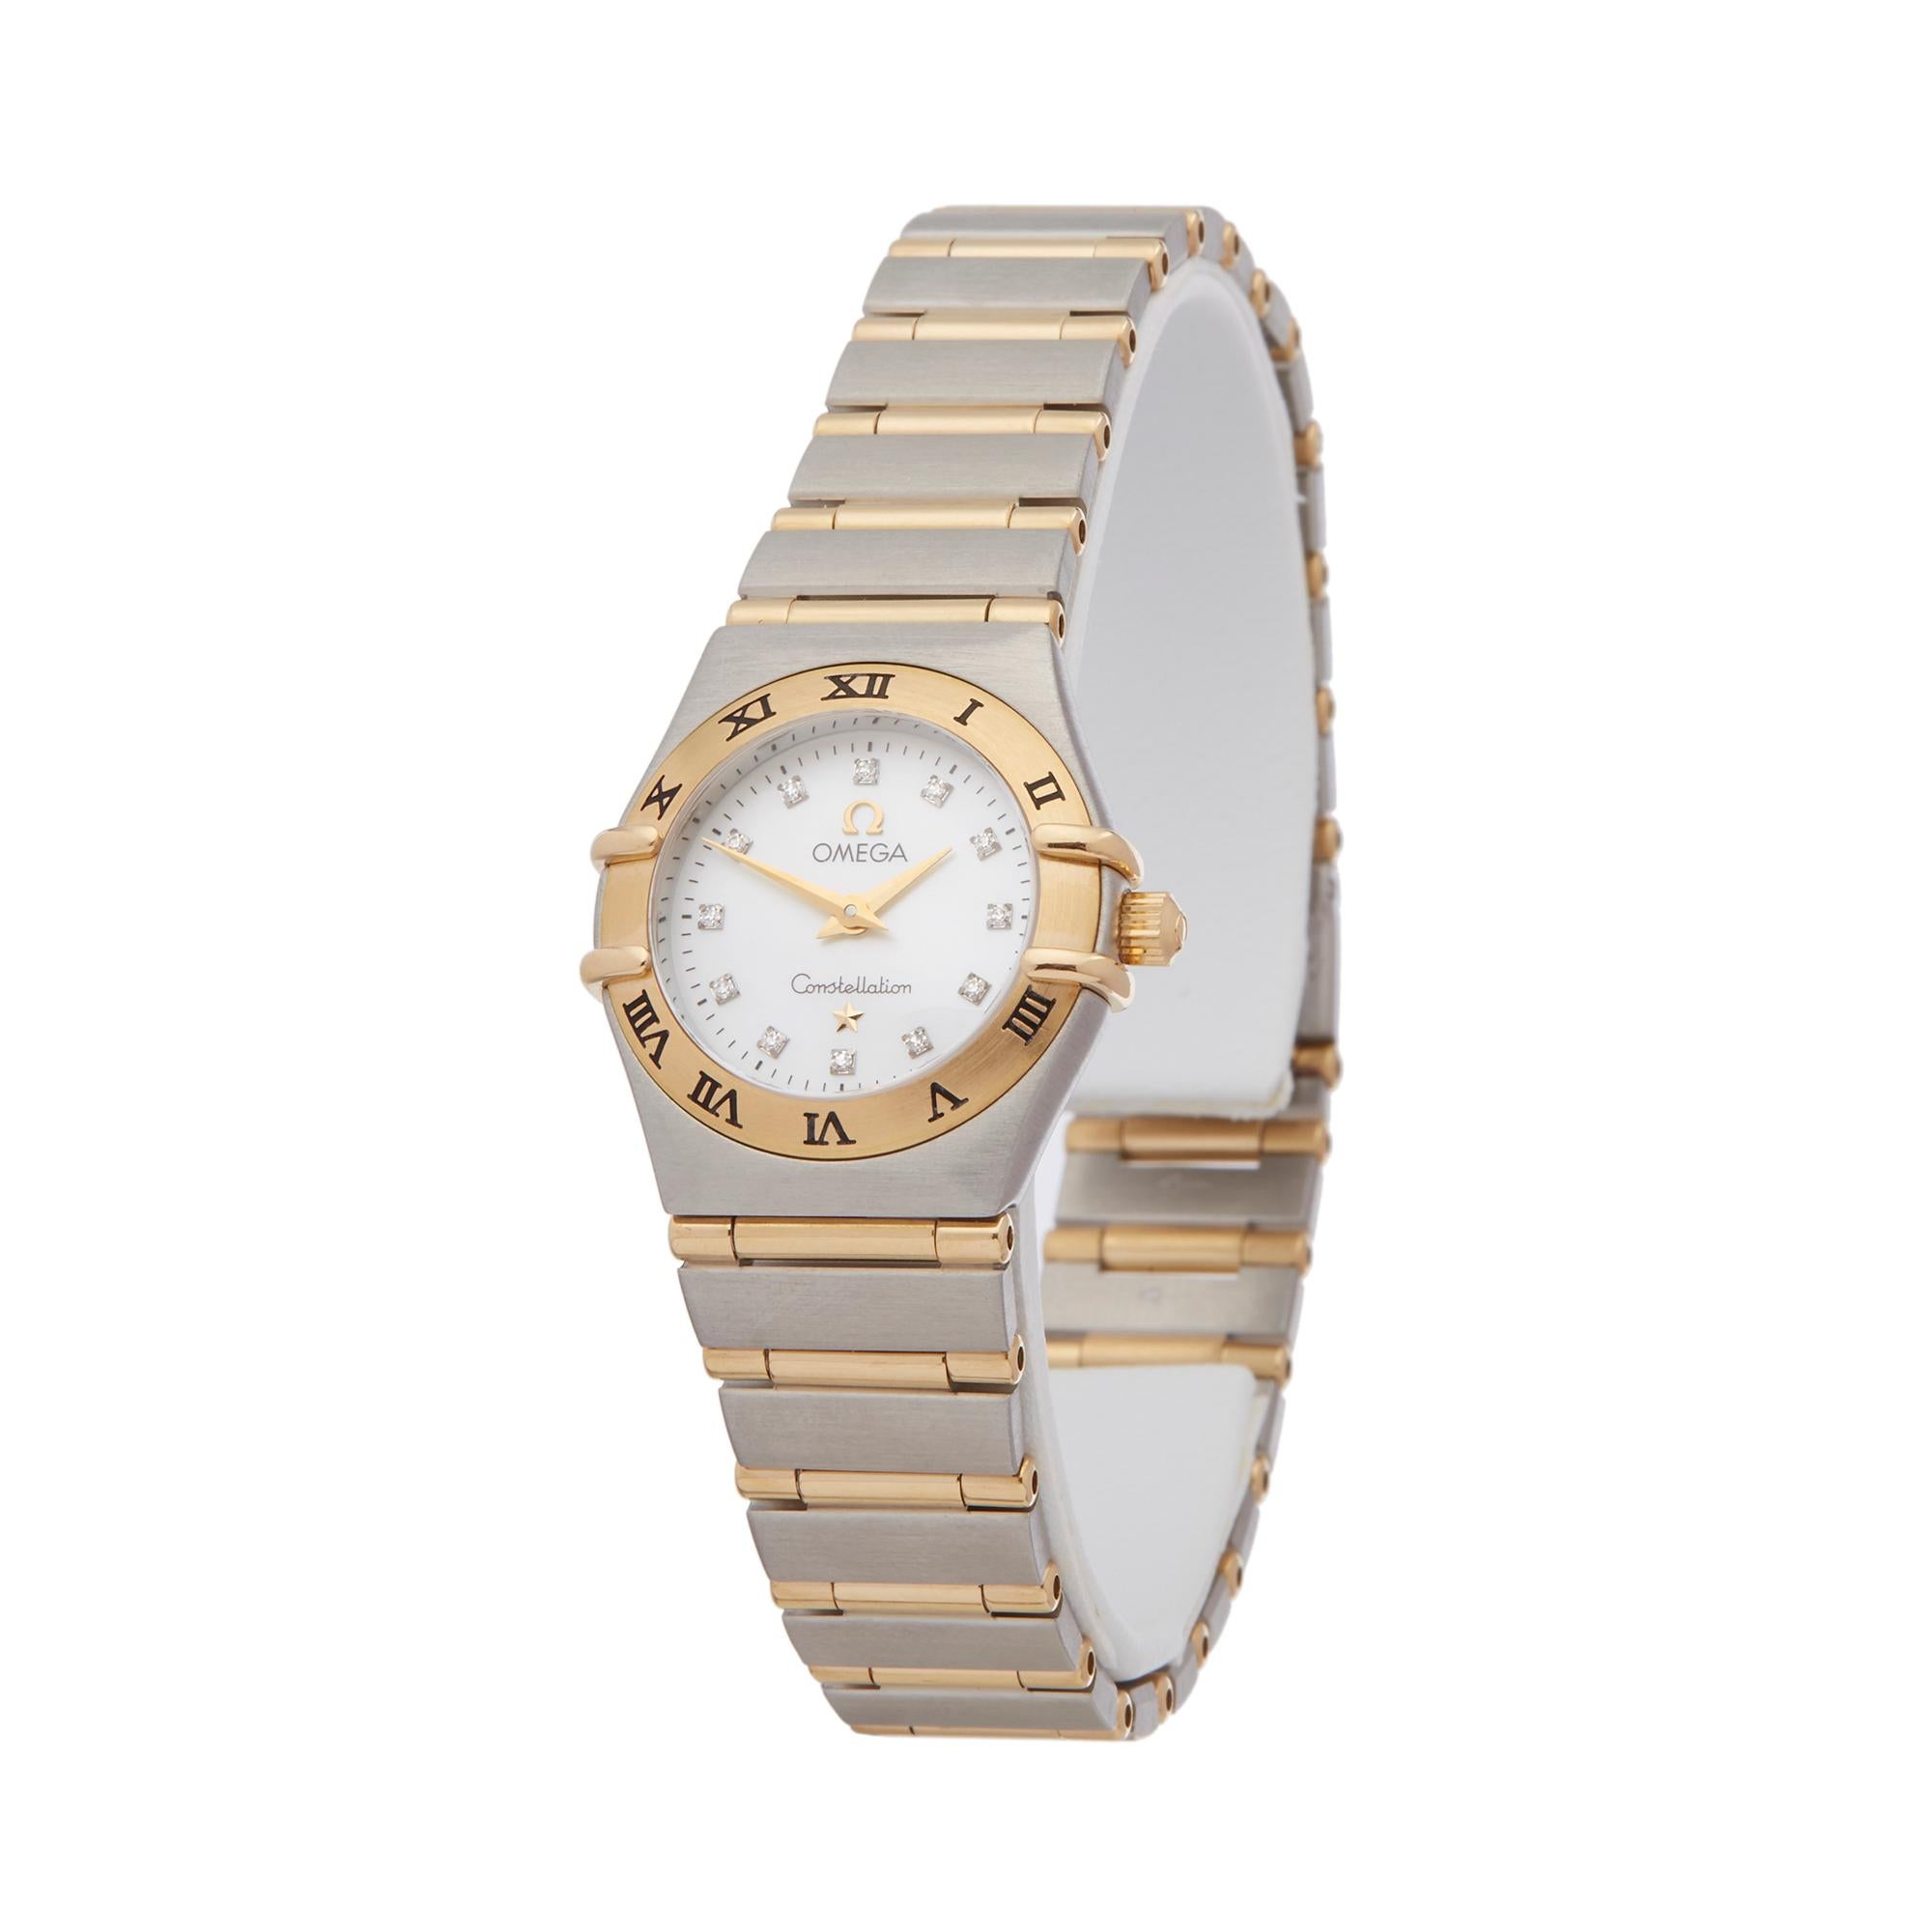 Ref: W6336
Manufacturer: Omega
Model: Constellation 
Model Ref: 1262.75.00
Age: Circa 2000's
Gender: Ladies
Complete With: Box, Manuals & Guarantee
Dial: Mother of Pearl & Diamond Markers
Glass: Sapphire Crystal
Movement: Automatic
Water Resistance: